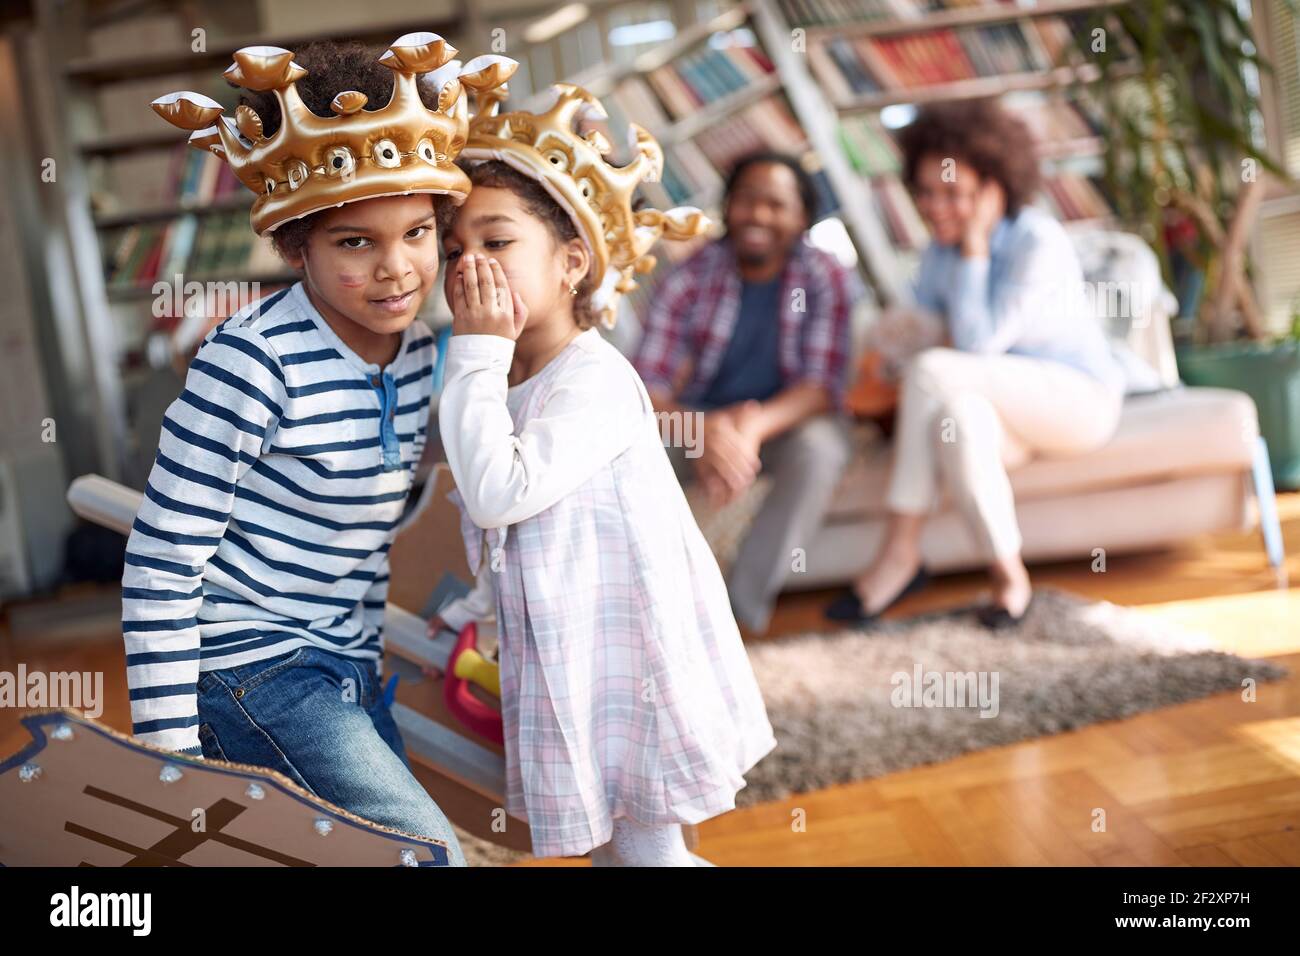 Kids are posing in a family atmosphere at home and whispering some secrets. Family, together, love, playtime Stock Photo